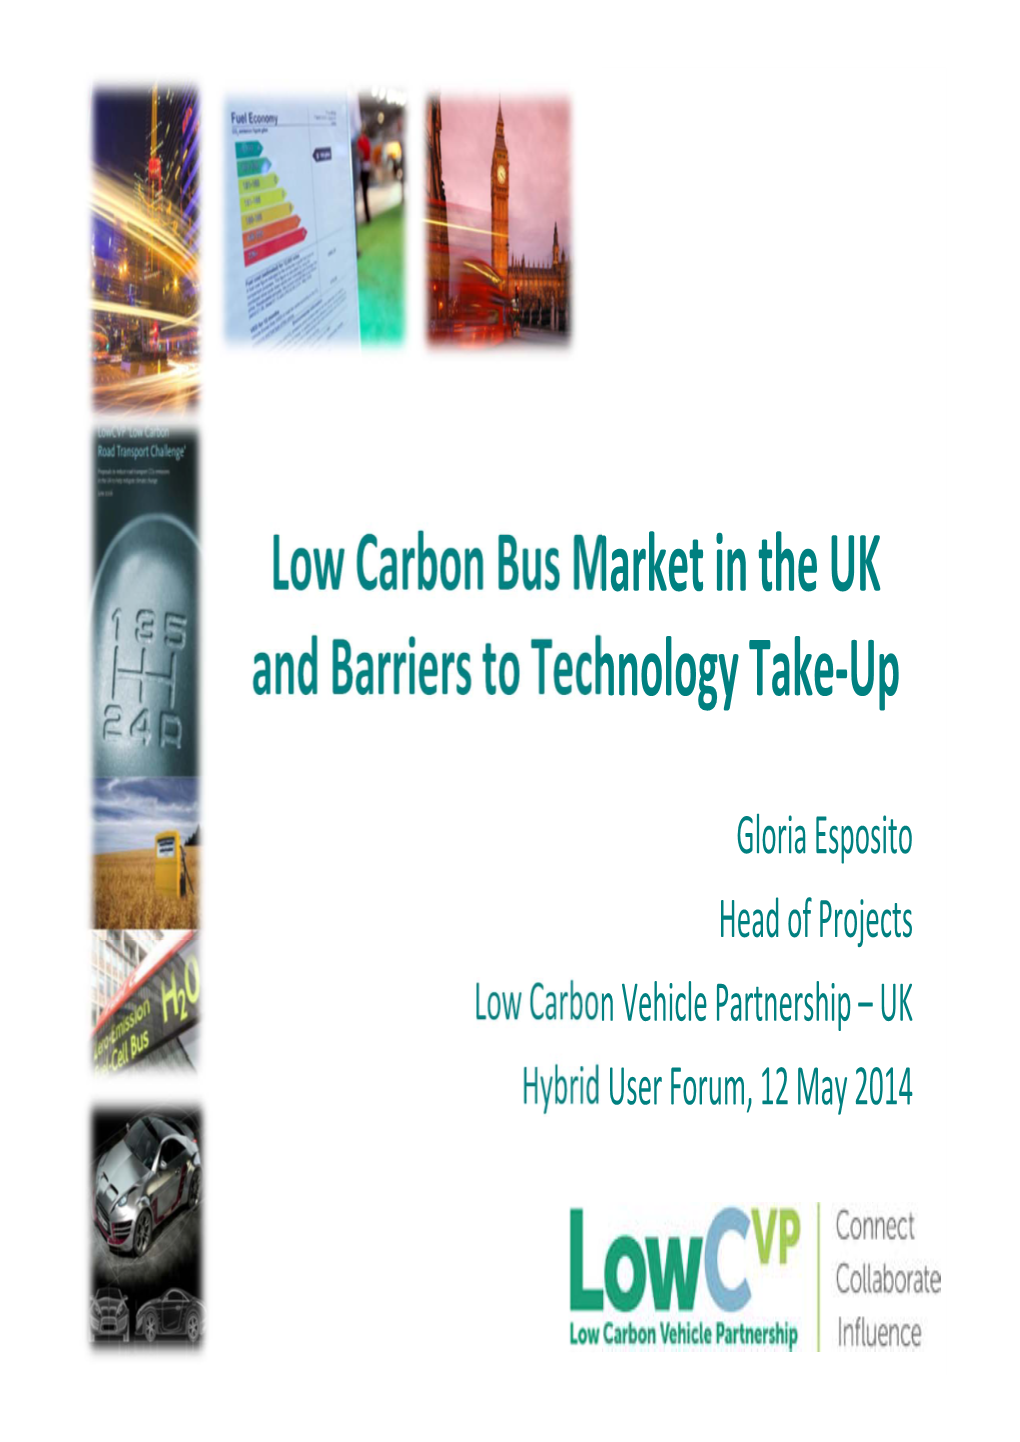 Low Carbon Bus Market in the UK and Barriers to Technology Take-Up